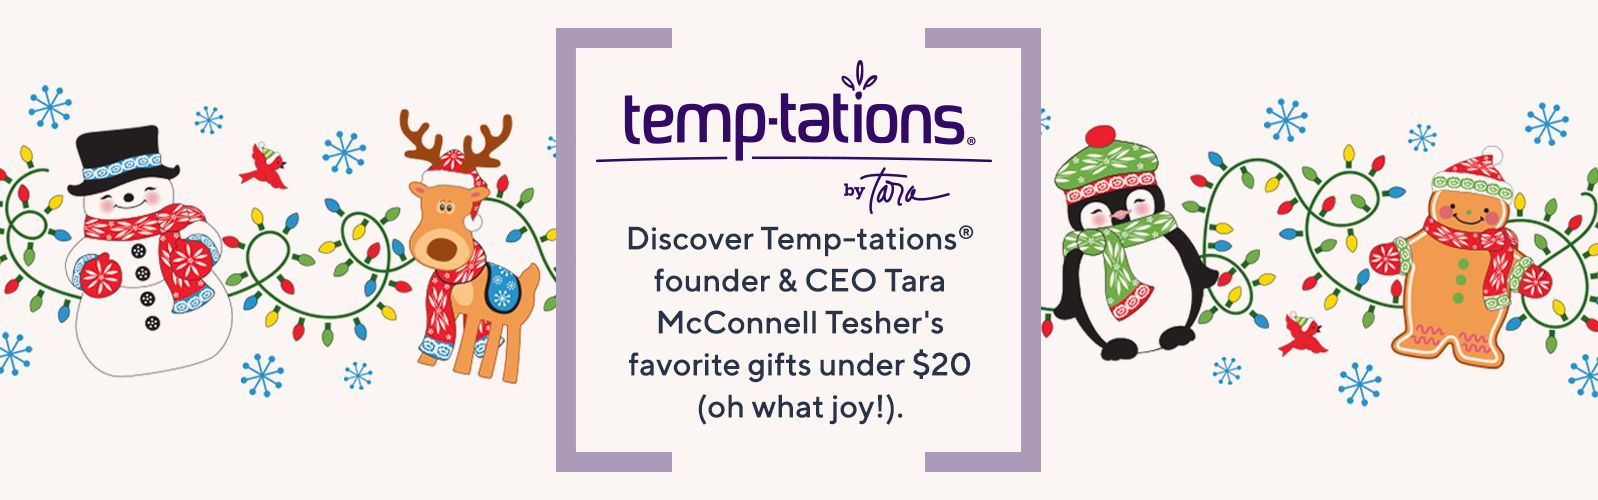 Temp-tations® by Tara. Discover Temp-tations® founder & CEO Tara McConnell Tesher's favorite gifts under $20 (oh what joy!). 